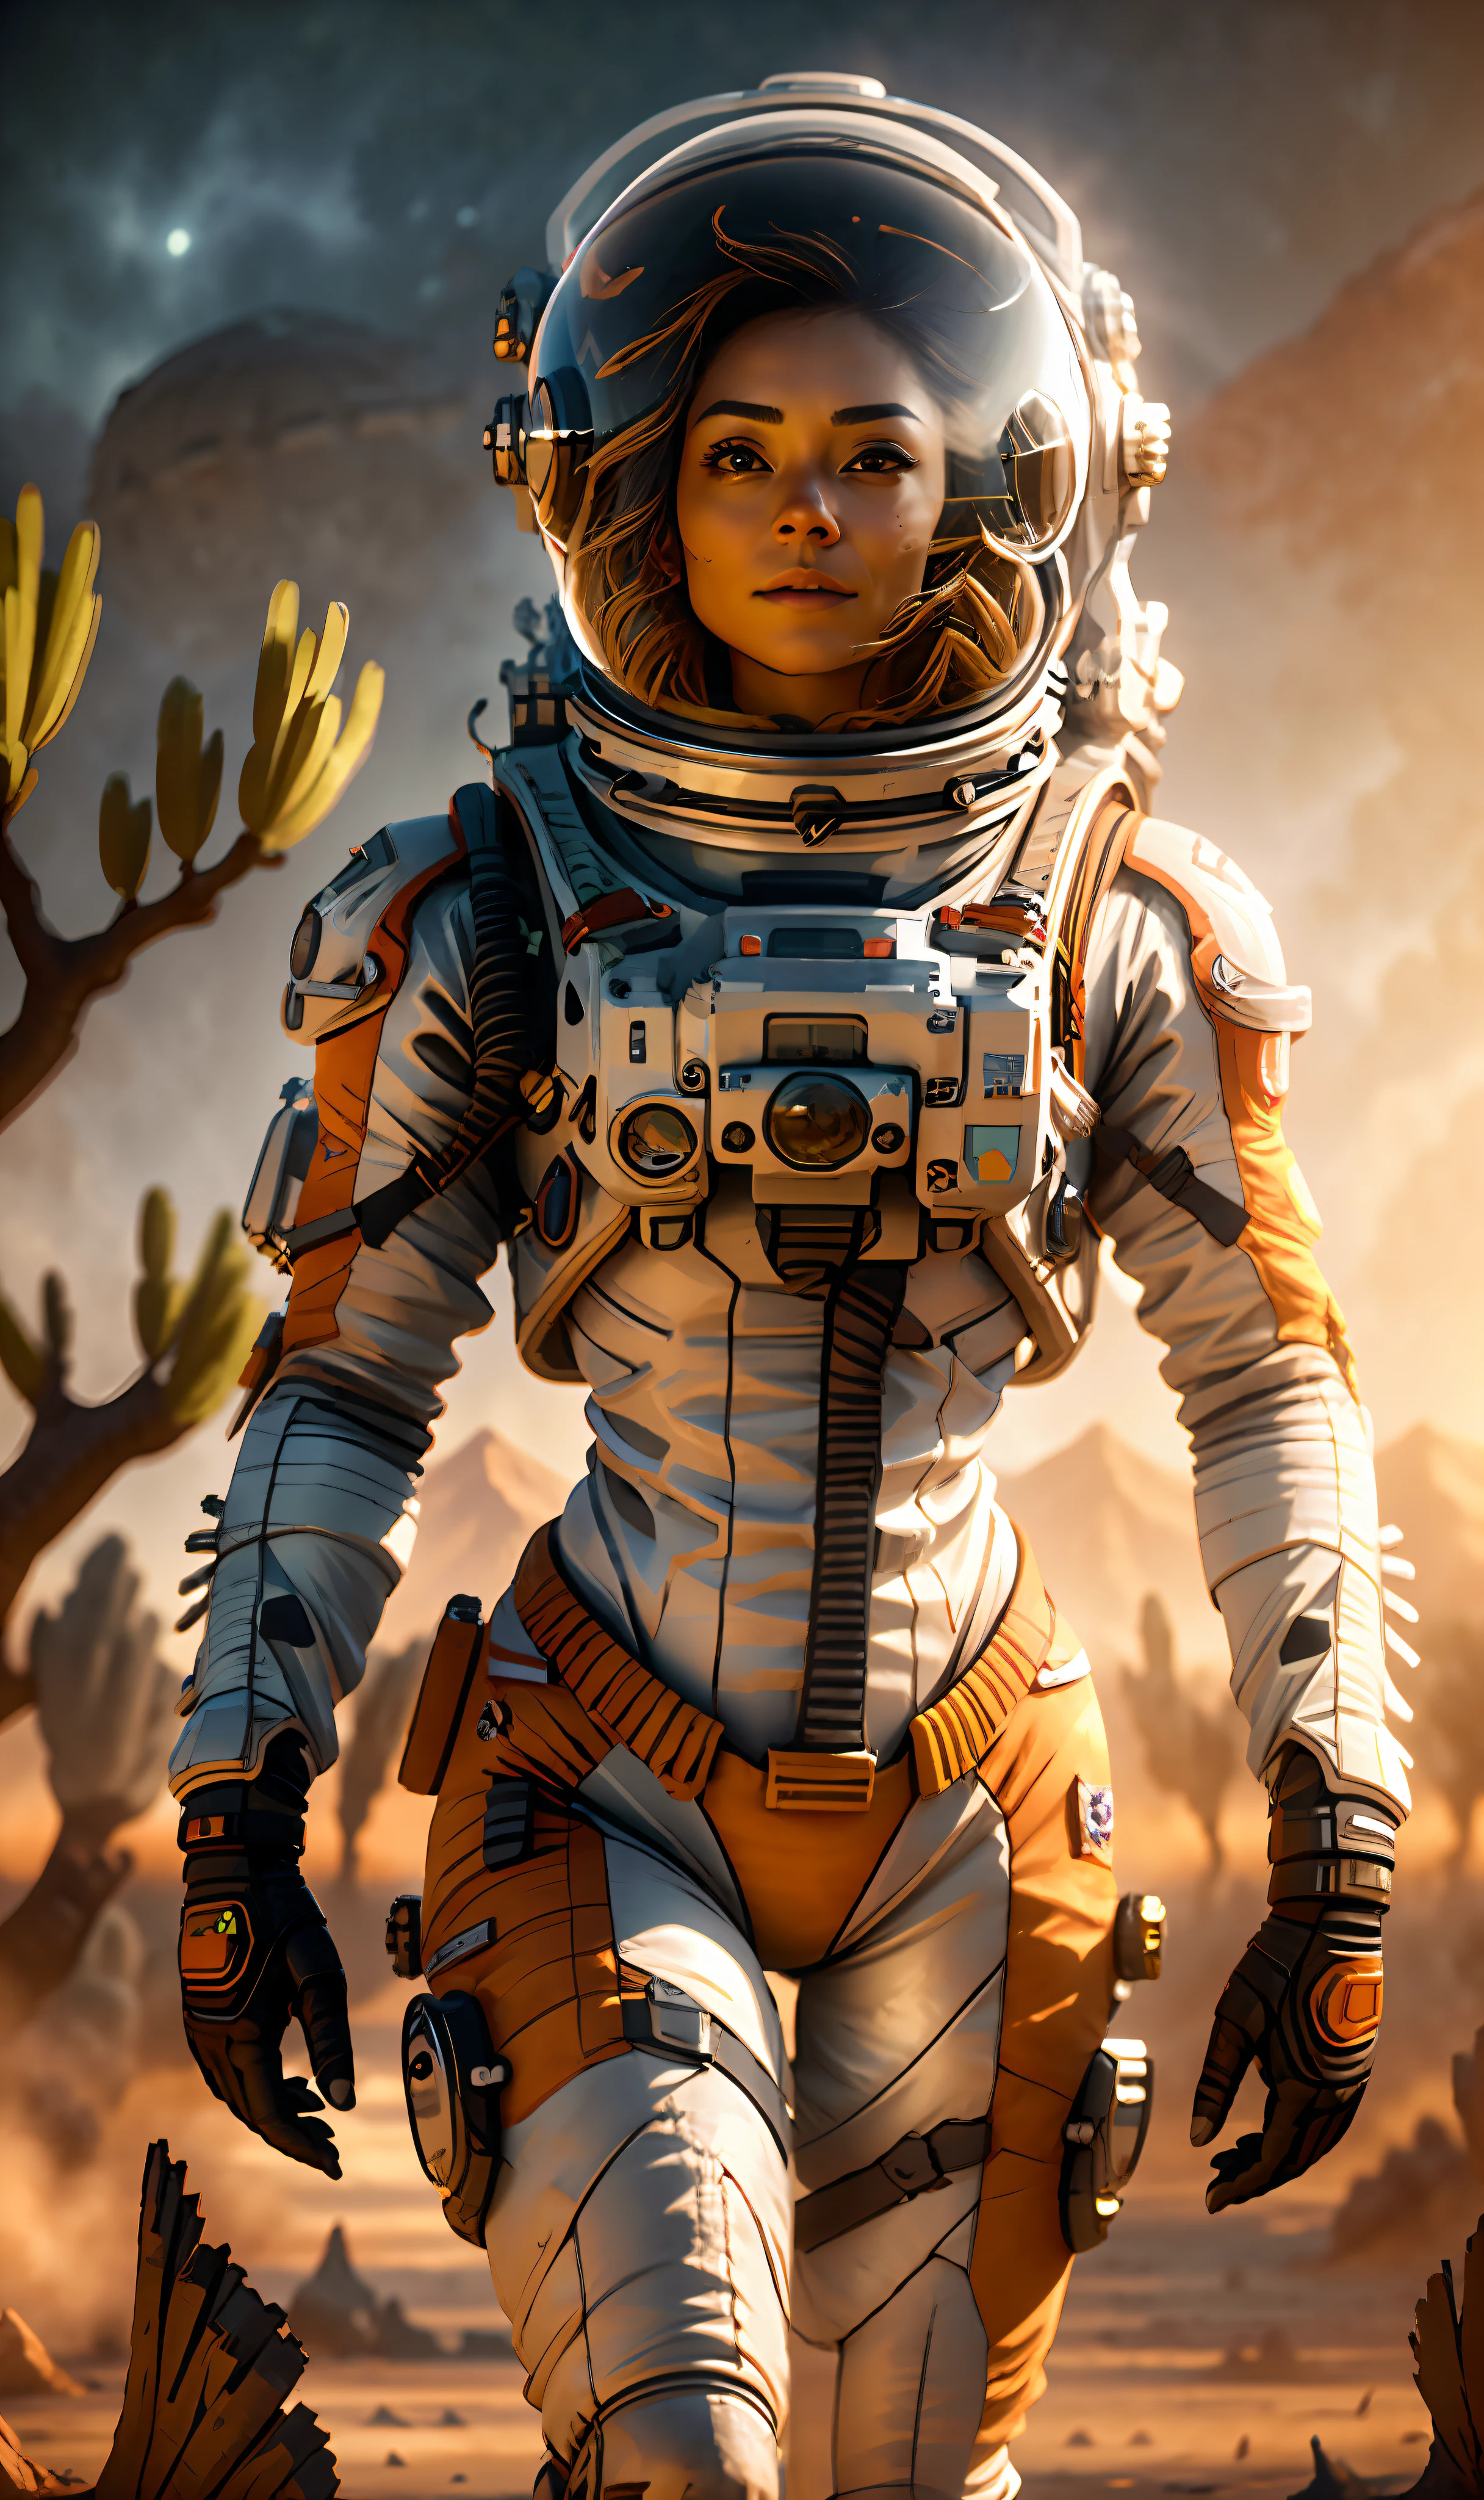 kit bashing, alien landscape, swampland, solitary female astronaut, radio dish antenna, Electric Purple, utility belt, Metallic Gray Zinc, sci-fi, masterpiece, 16k, UHD, HDR, the best quality, body-tight suit, intricate, the most fantastic details, cinematic composition, dramatic lighting, full body, celestial bodies in the sky, dead trees, dry bushes, realistic reflections, sunset, a military compound, to scale, , sad, dynamic posture, ruffles, quillings, embroidery